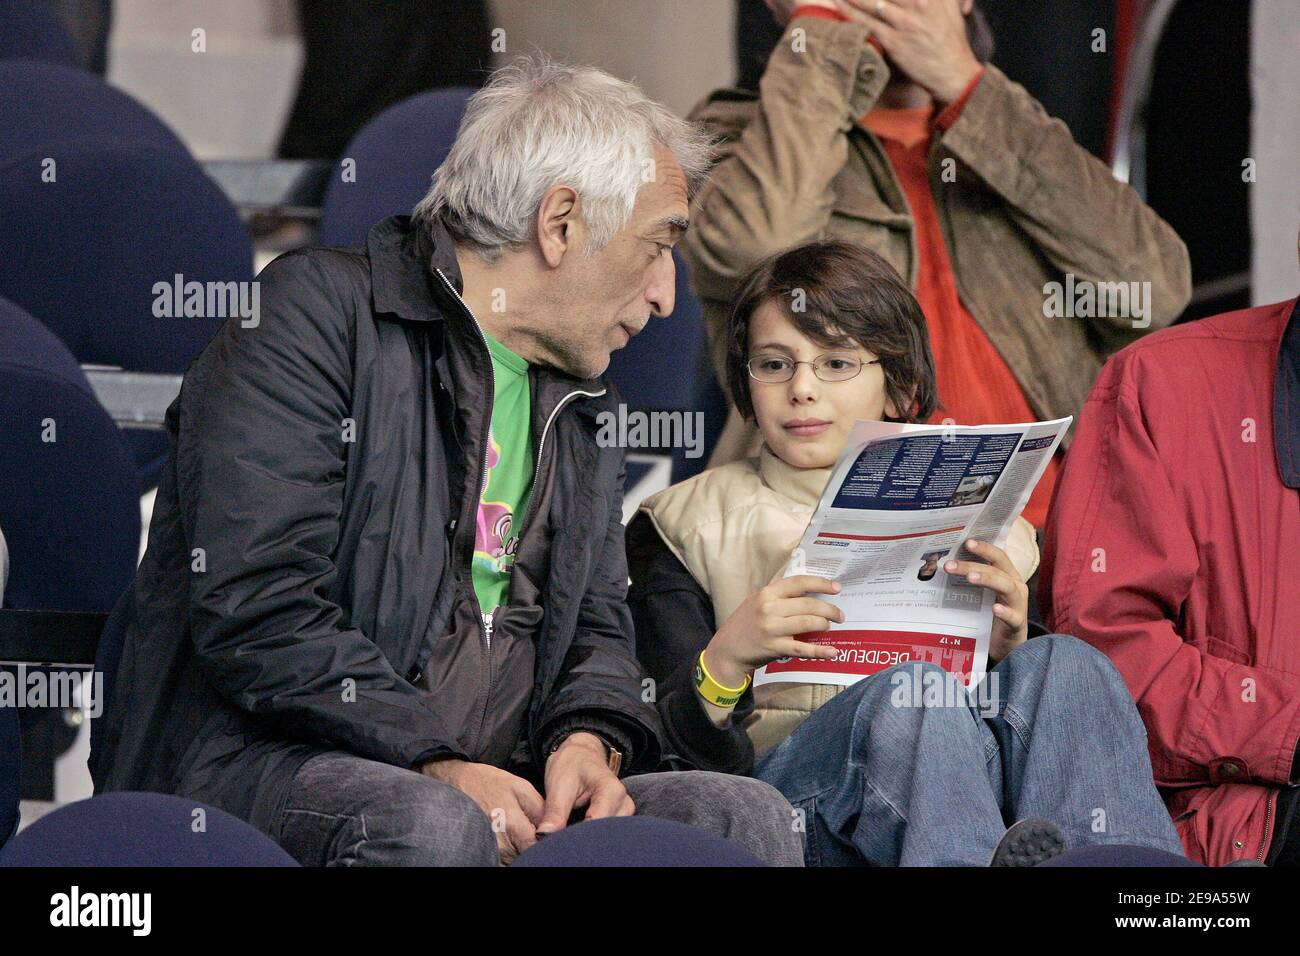 French actor Gerard Darmon and his son attend the French first league football match Paris Saint-Germain vs Ajaccio at the Parc des Princes in Paris, France, on May 6, 2006. Ajaccio won 4-2. Photo by Laurent Zabulon/ABACAPRESS.COM Stock Photo